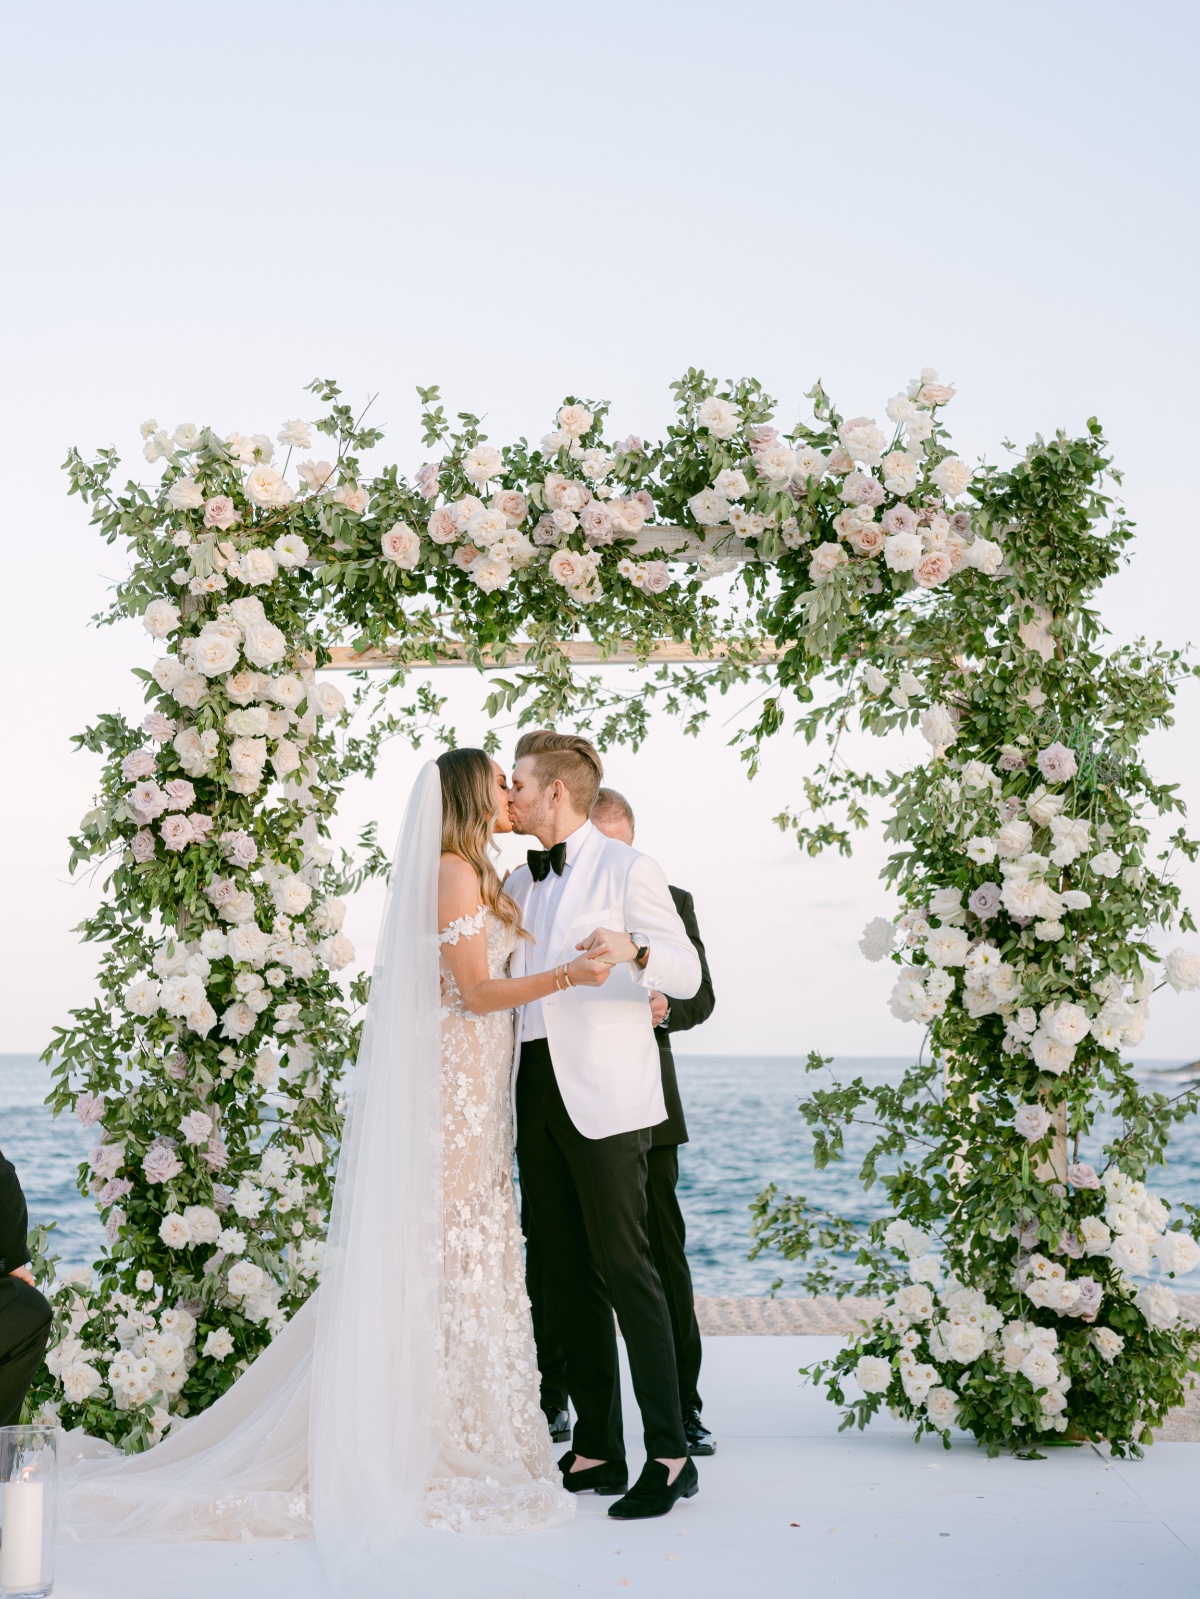 Bride and groom kissing in front of floral arch at ceremony